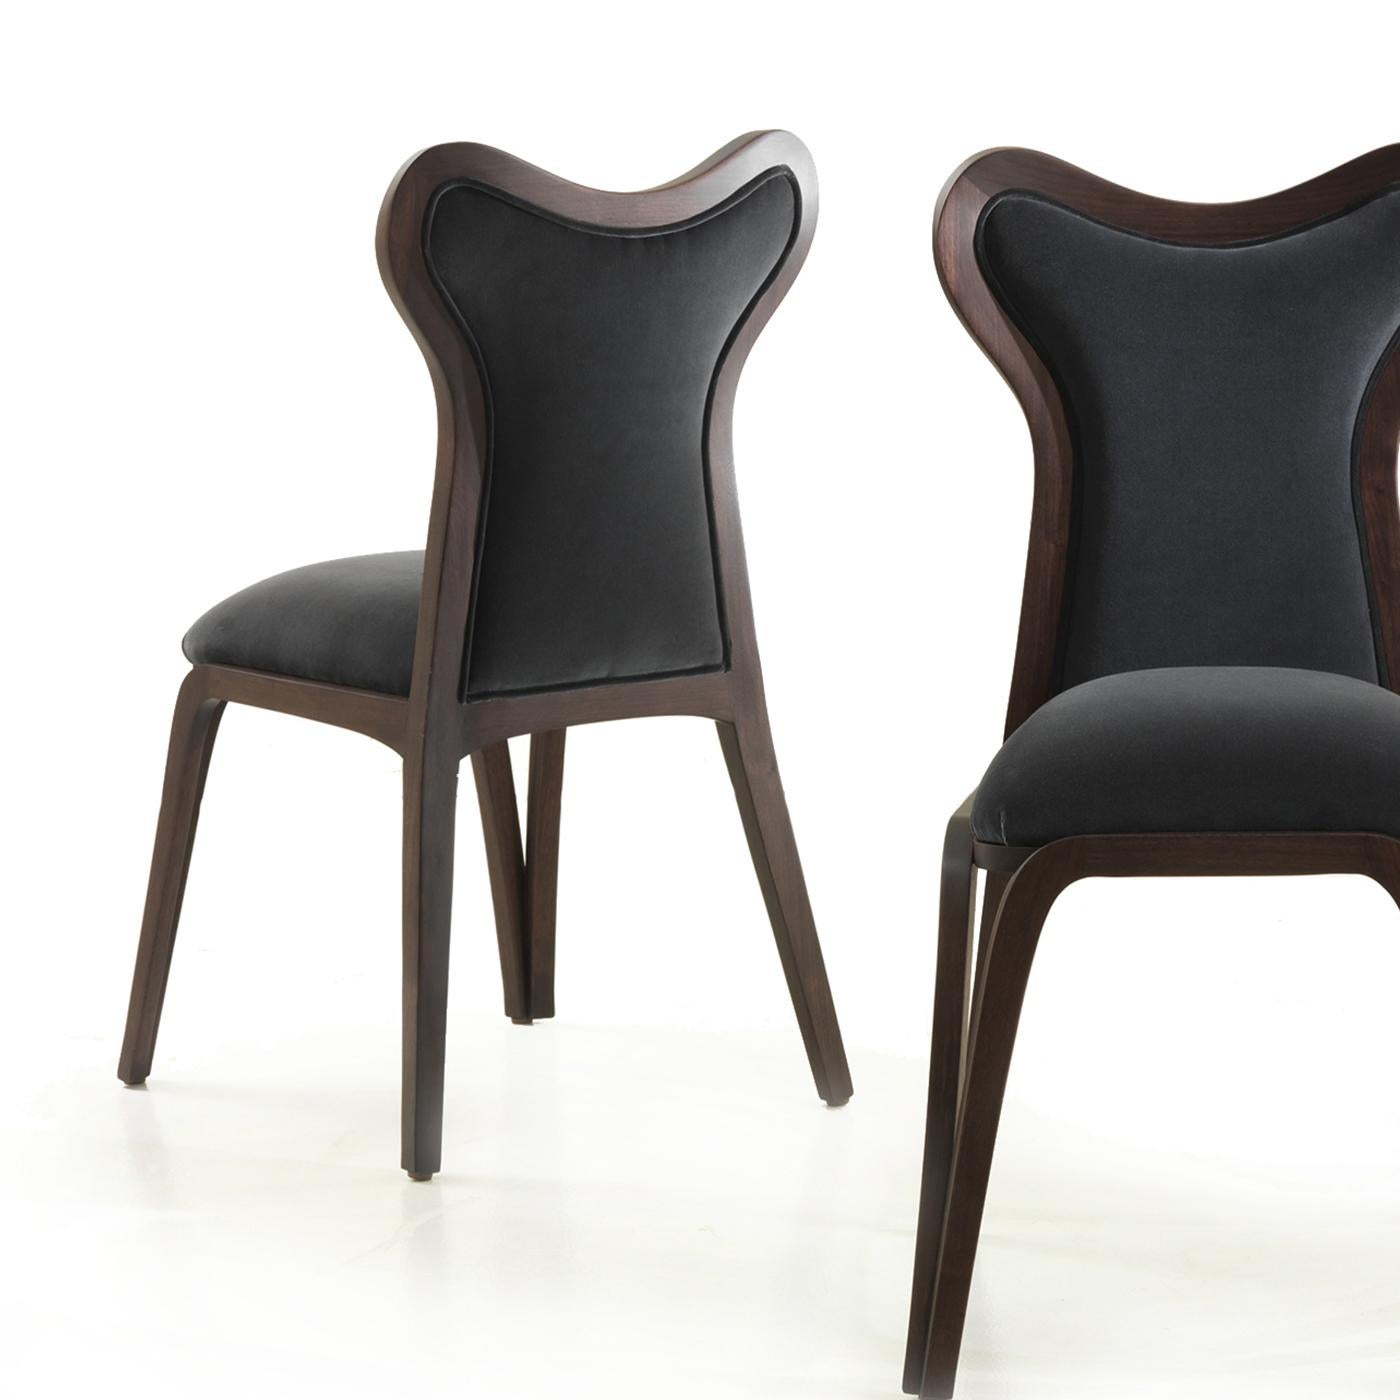 A stunning series of curves distinguish the elegant and playful design of this chair. Either displayed with multiples around a dining table or behind a Classic desk, this will be a timeless addition to both a Classic and contemporary interior. The